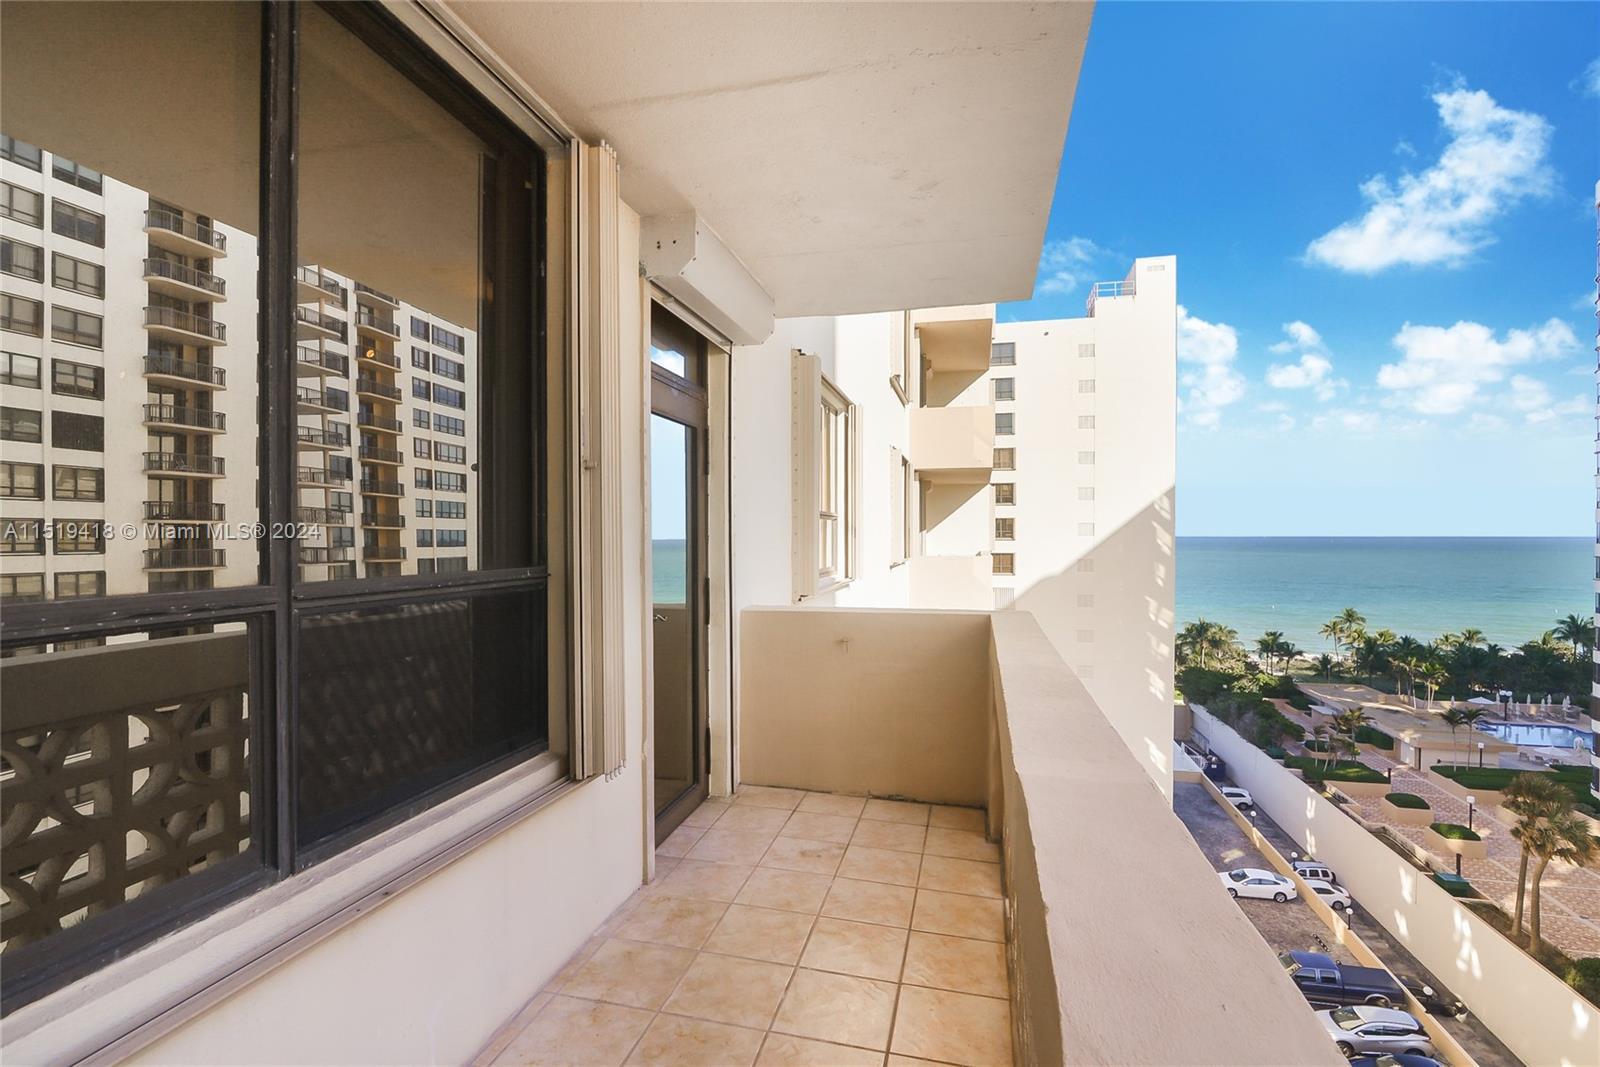 This is the best opportunity to buy a renovated condo at The Plaza Bal Harbour! Enjoy life at the be